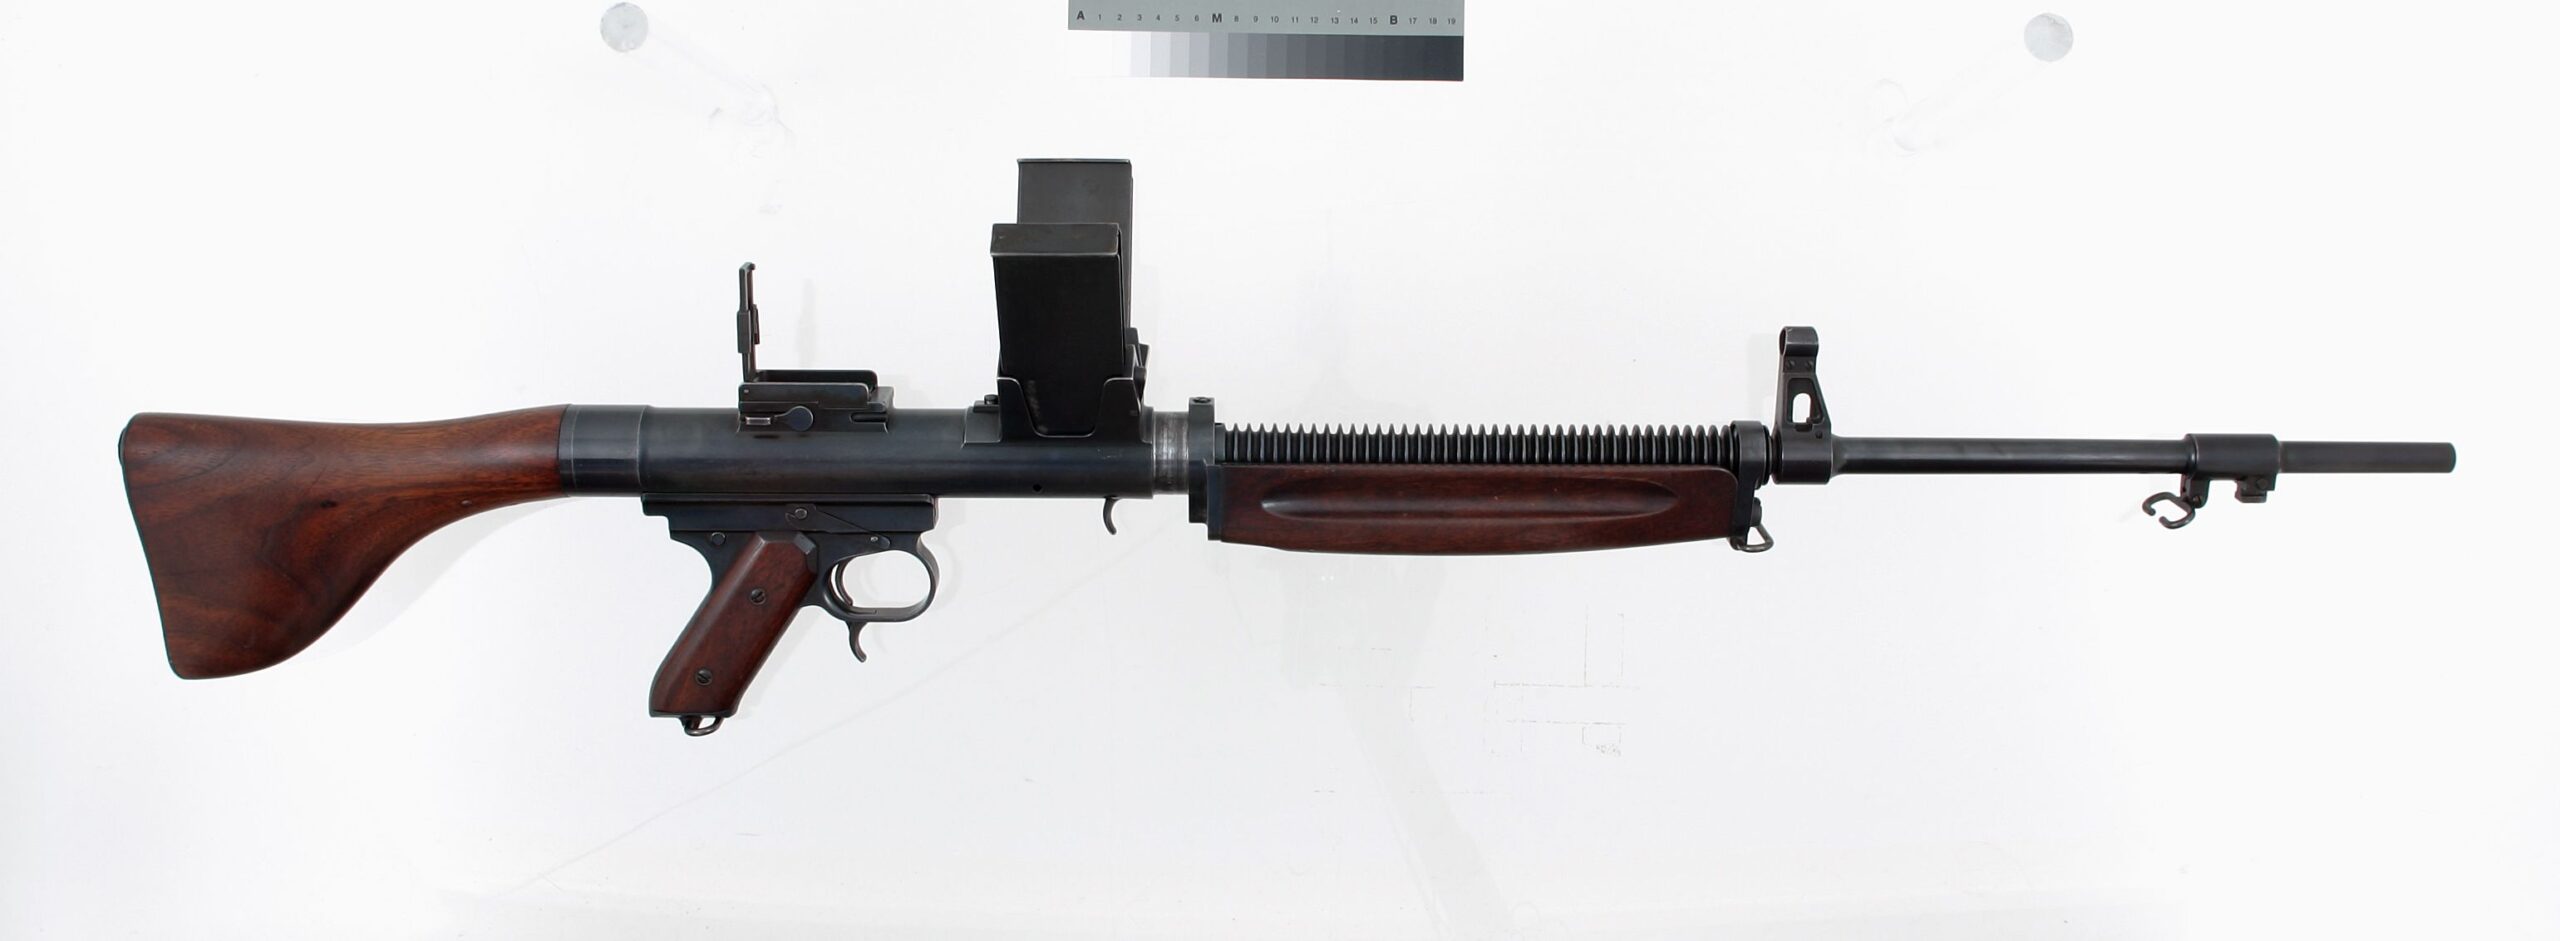 One of the first assault rifles, the Burton was chambered in .345 WSL.